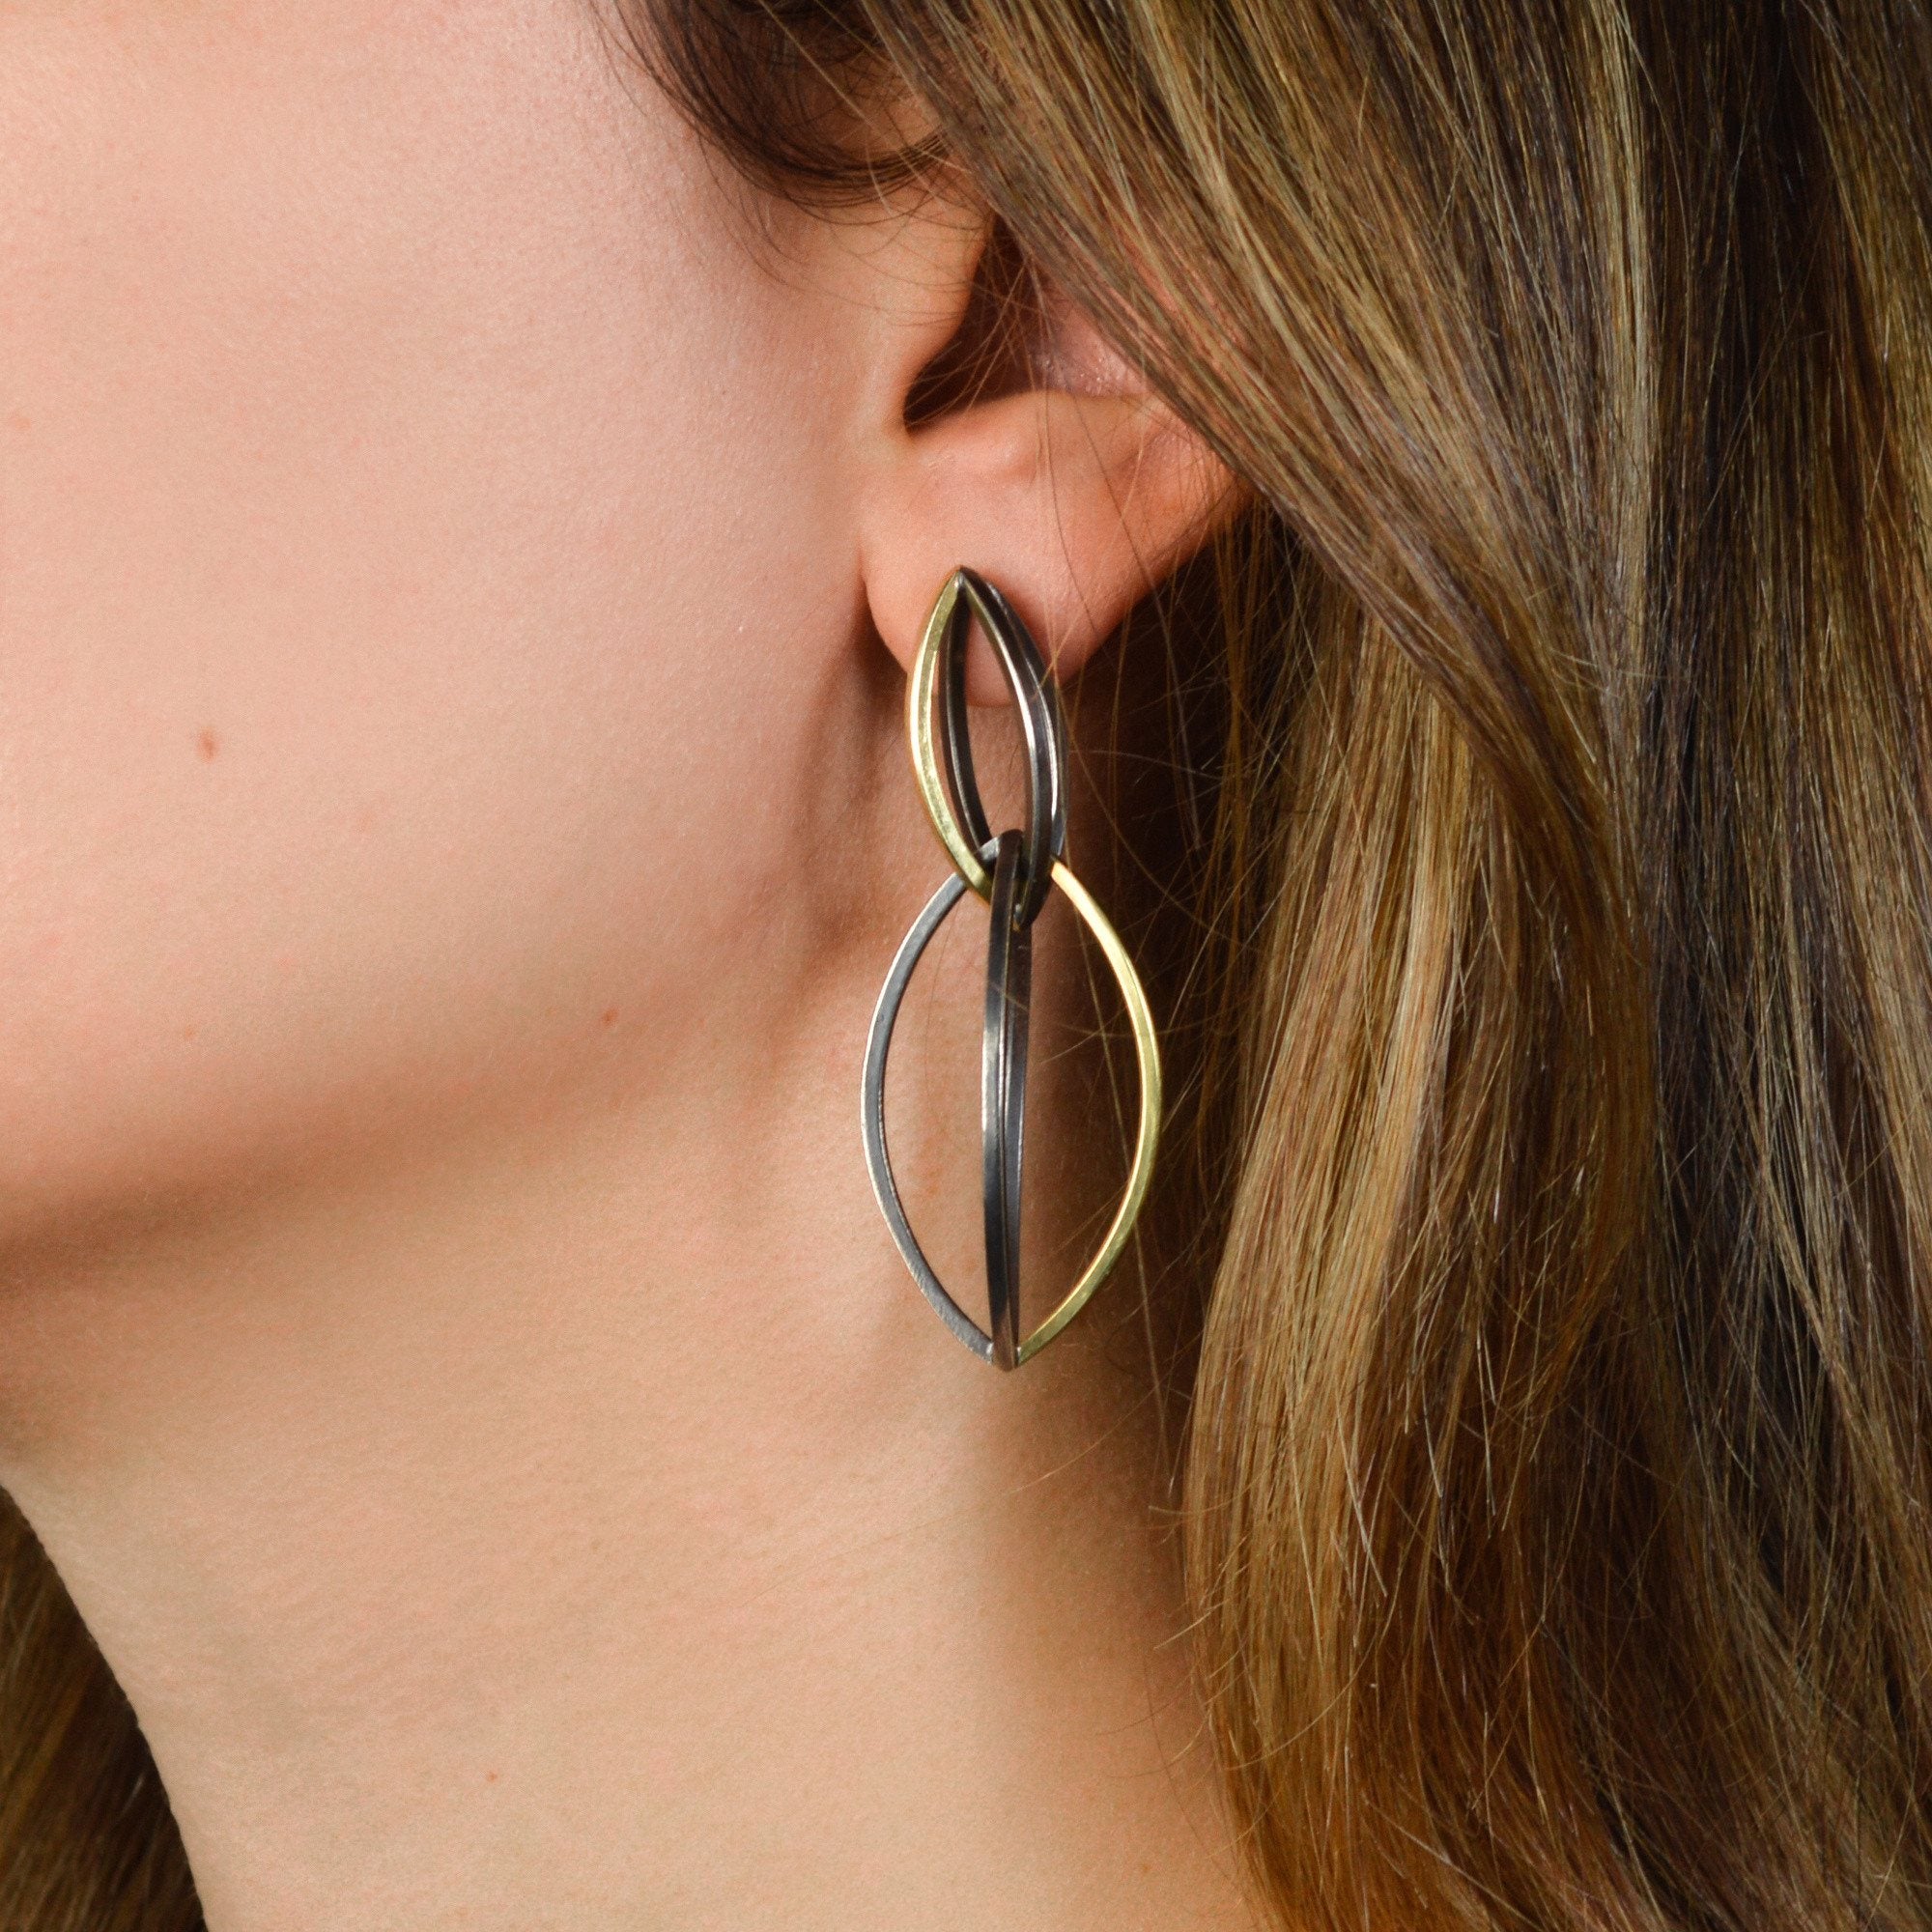 Swell Earrings in 18k Gold and blackened Sterling Silver